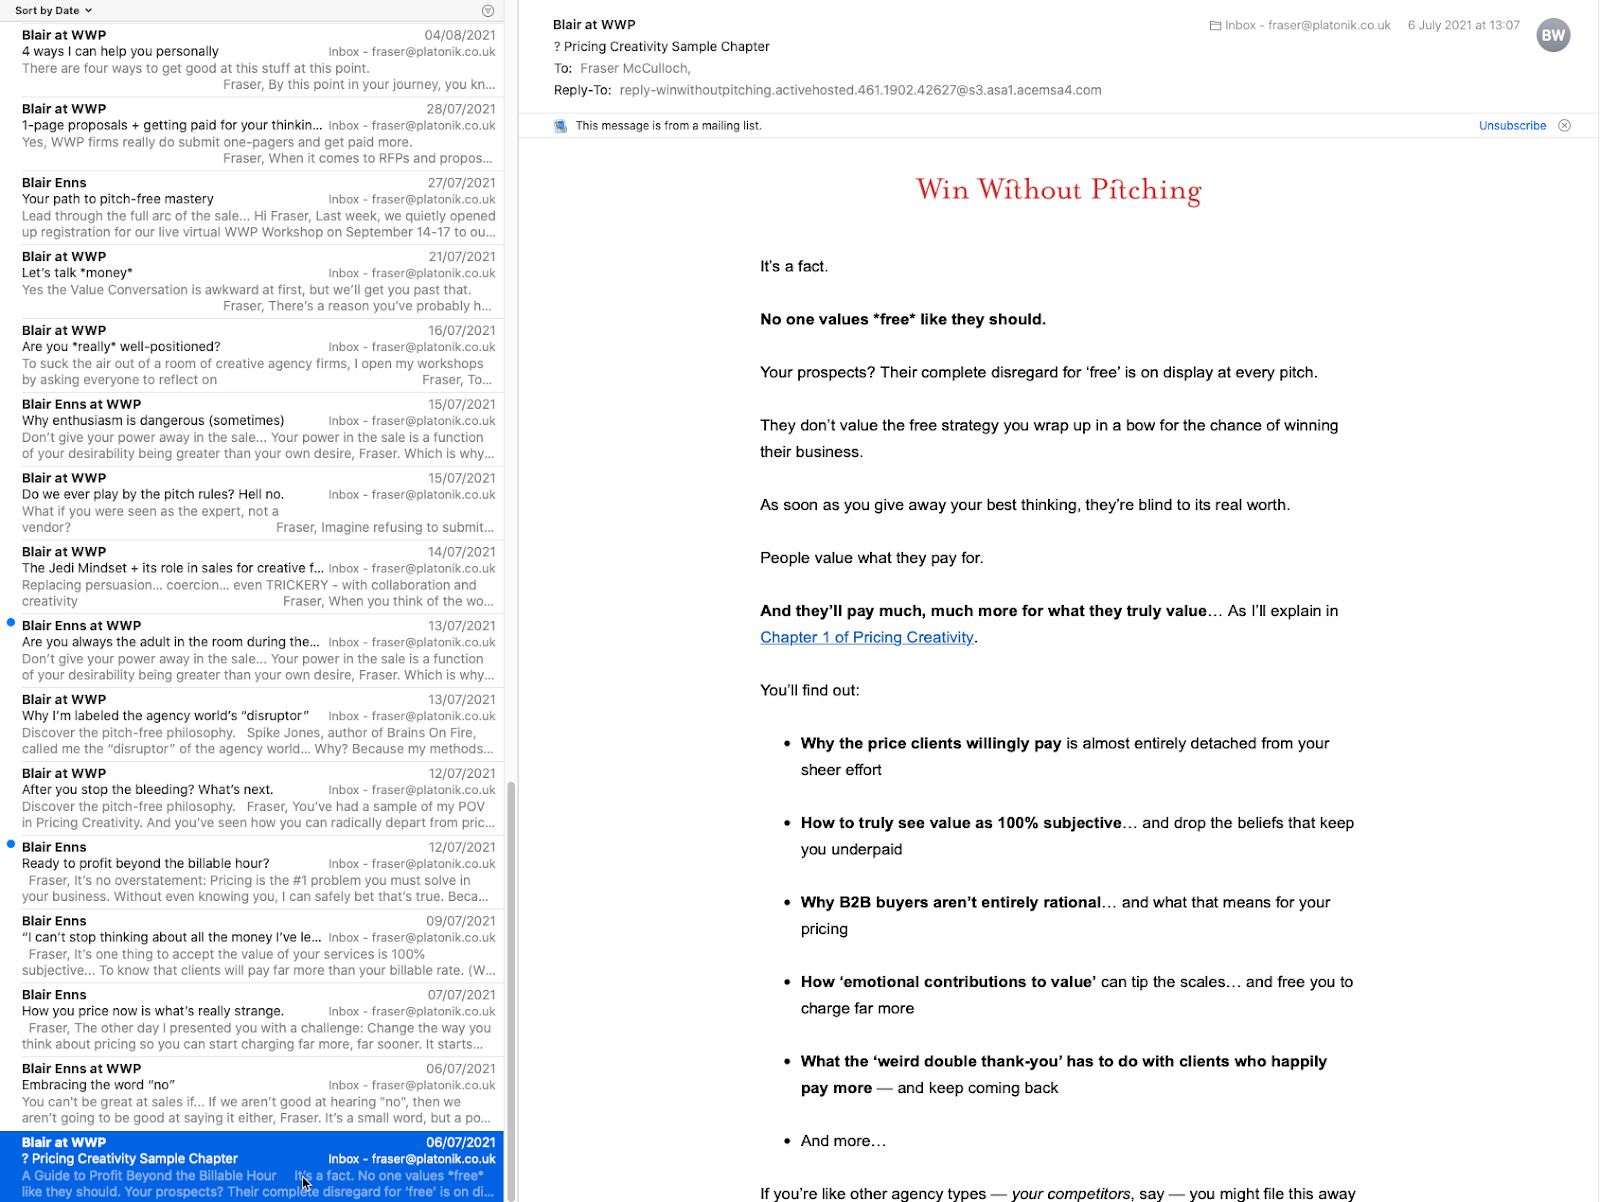 Email inbox; on right, Win Without Pitching's email 